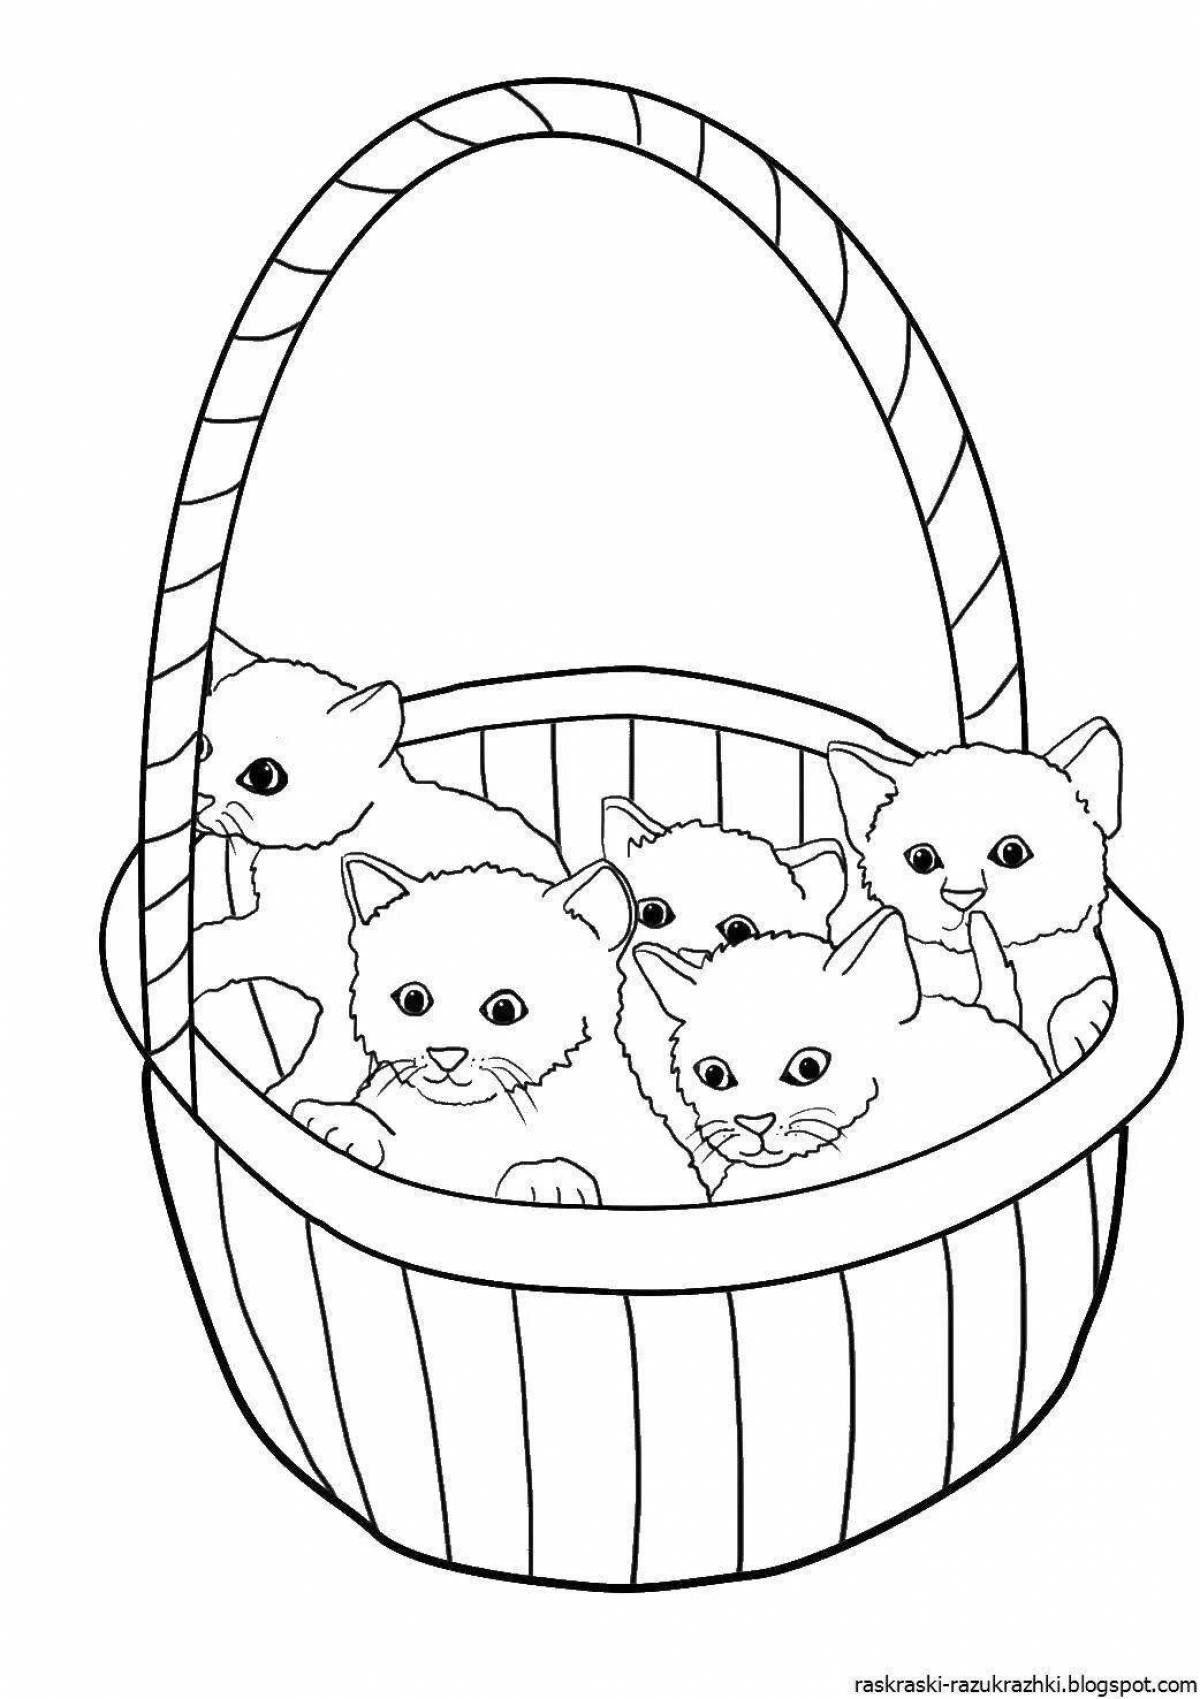 Adorable little kittens coloring book